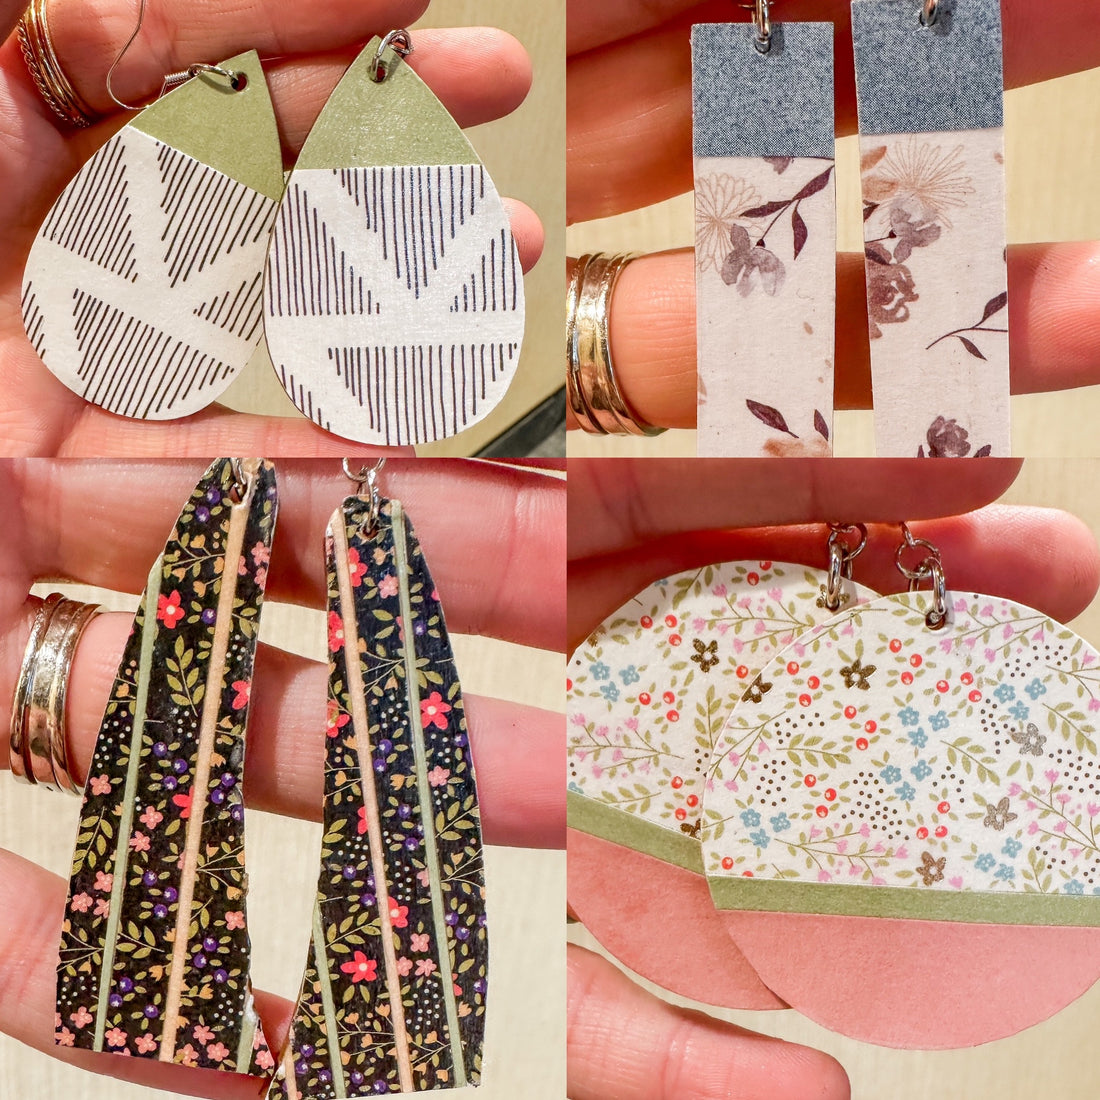 DIY Wooden Earring Workshop at the Plaza!